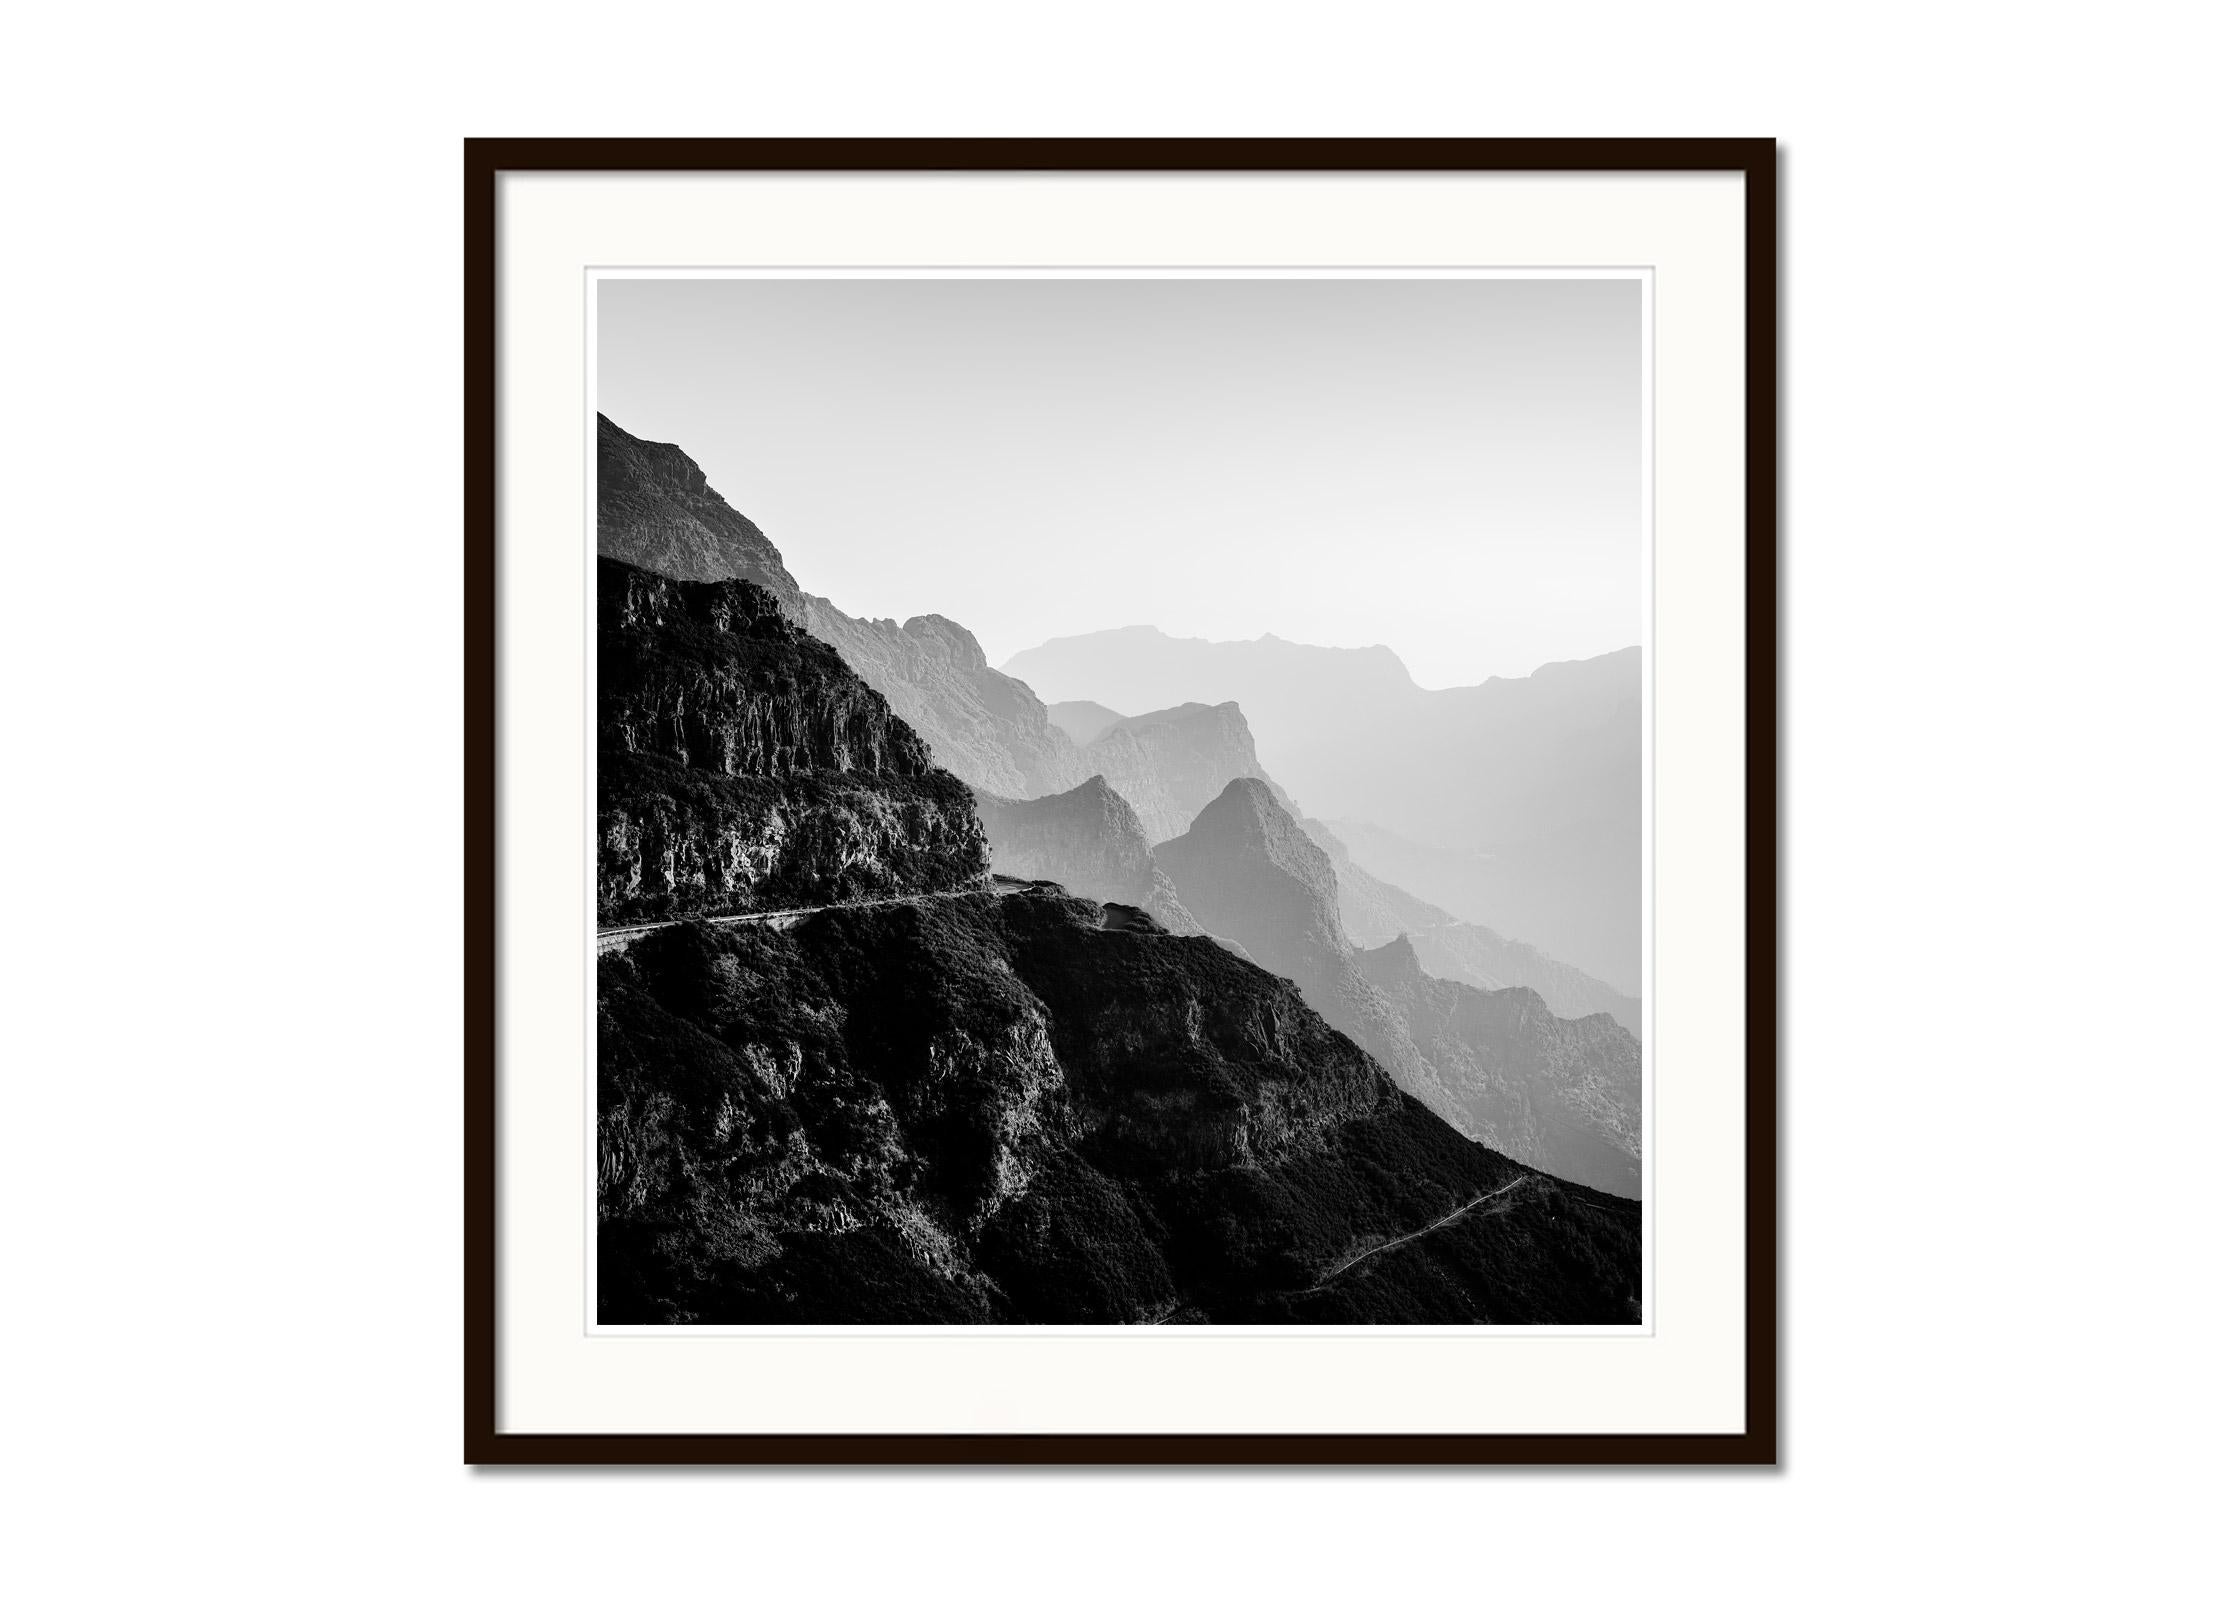 Black and white fine art landscape photography print. Madeira's mountain peaks in morning light, Fanal, Portugal. Archival pigment ink print, edition of 8. Signed, titled, dated and numbered by artist. Certificate of authenticity included. Printed